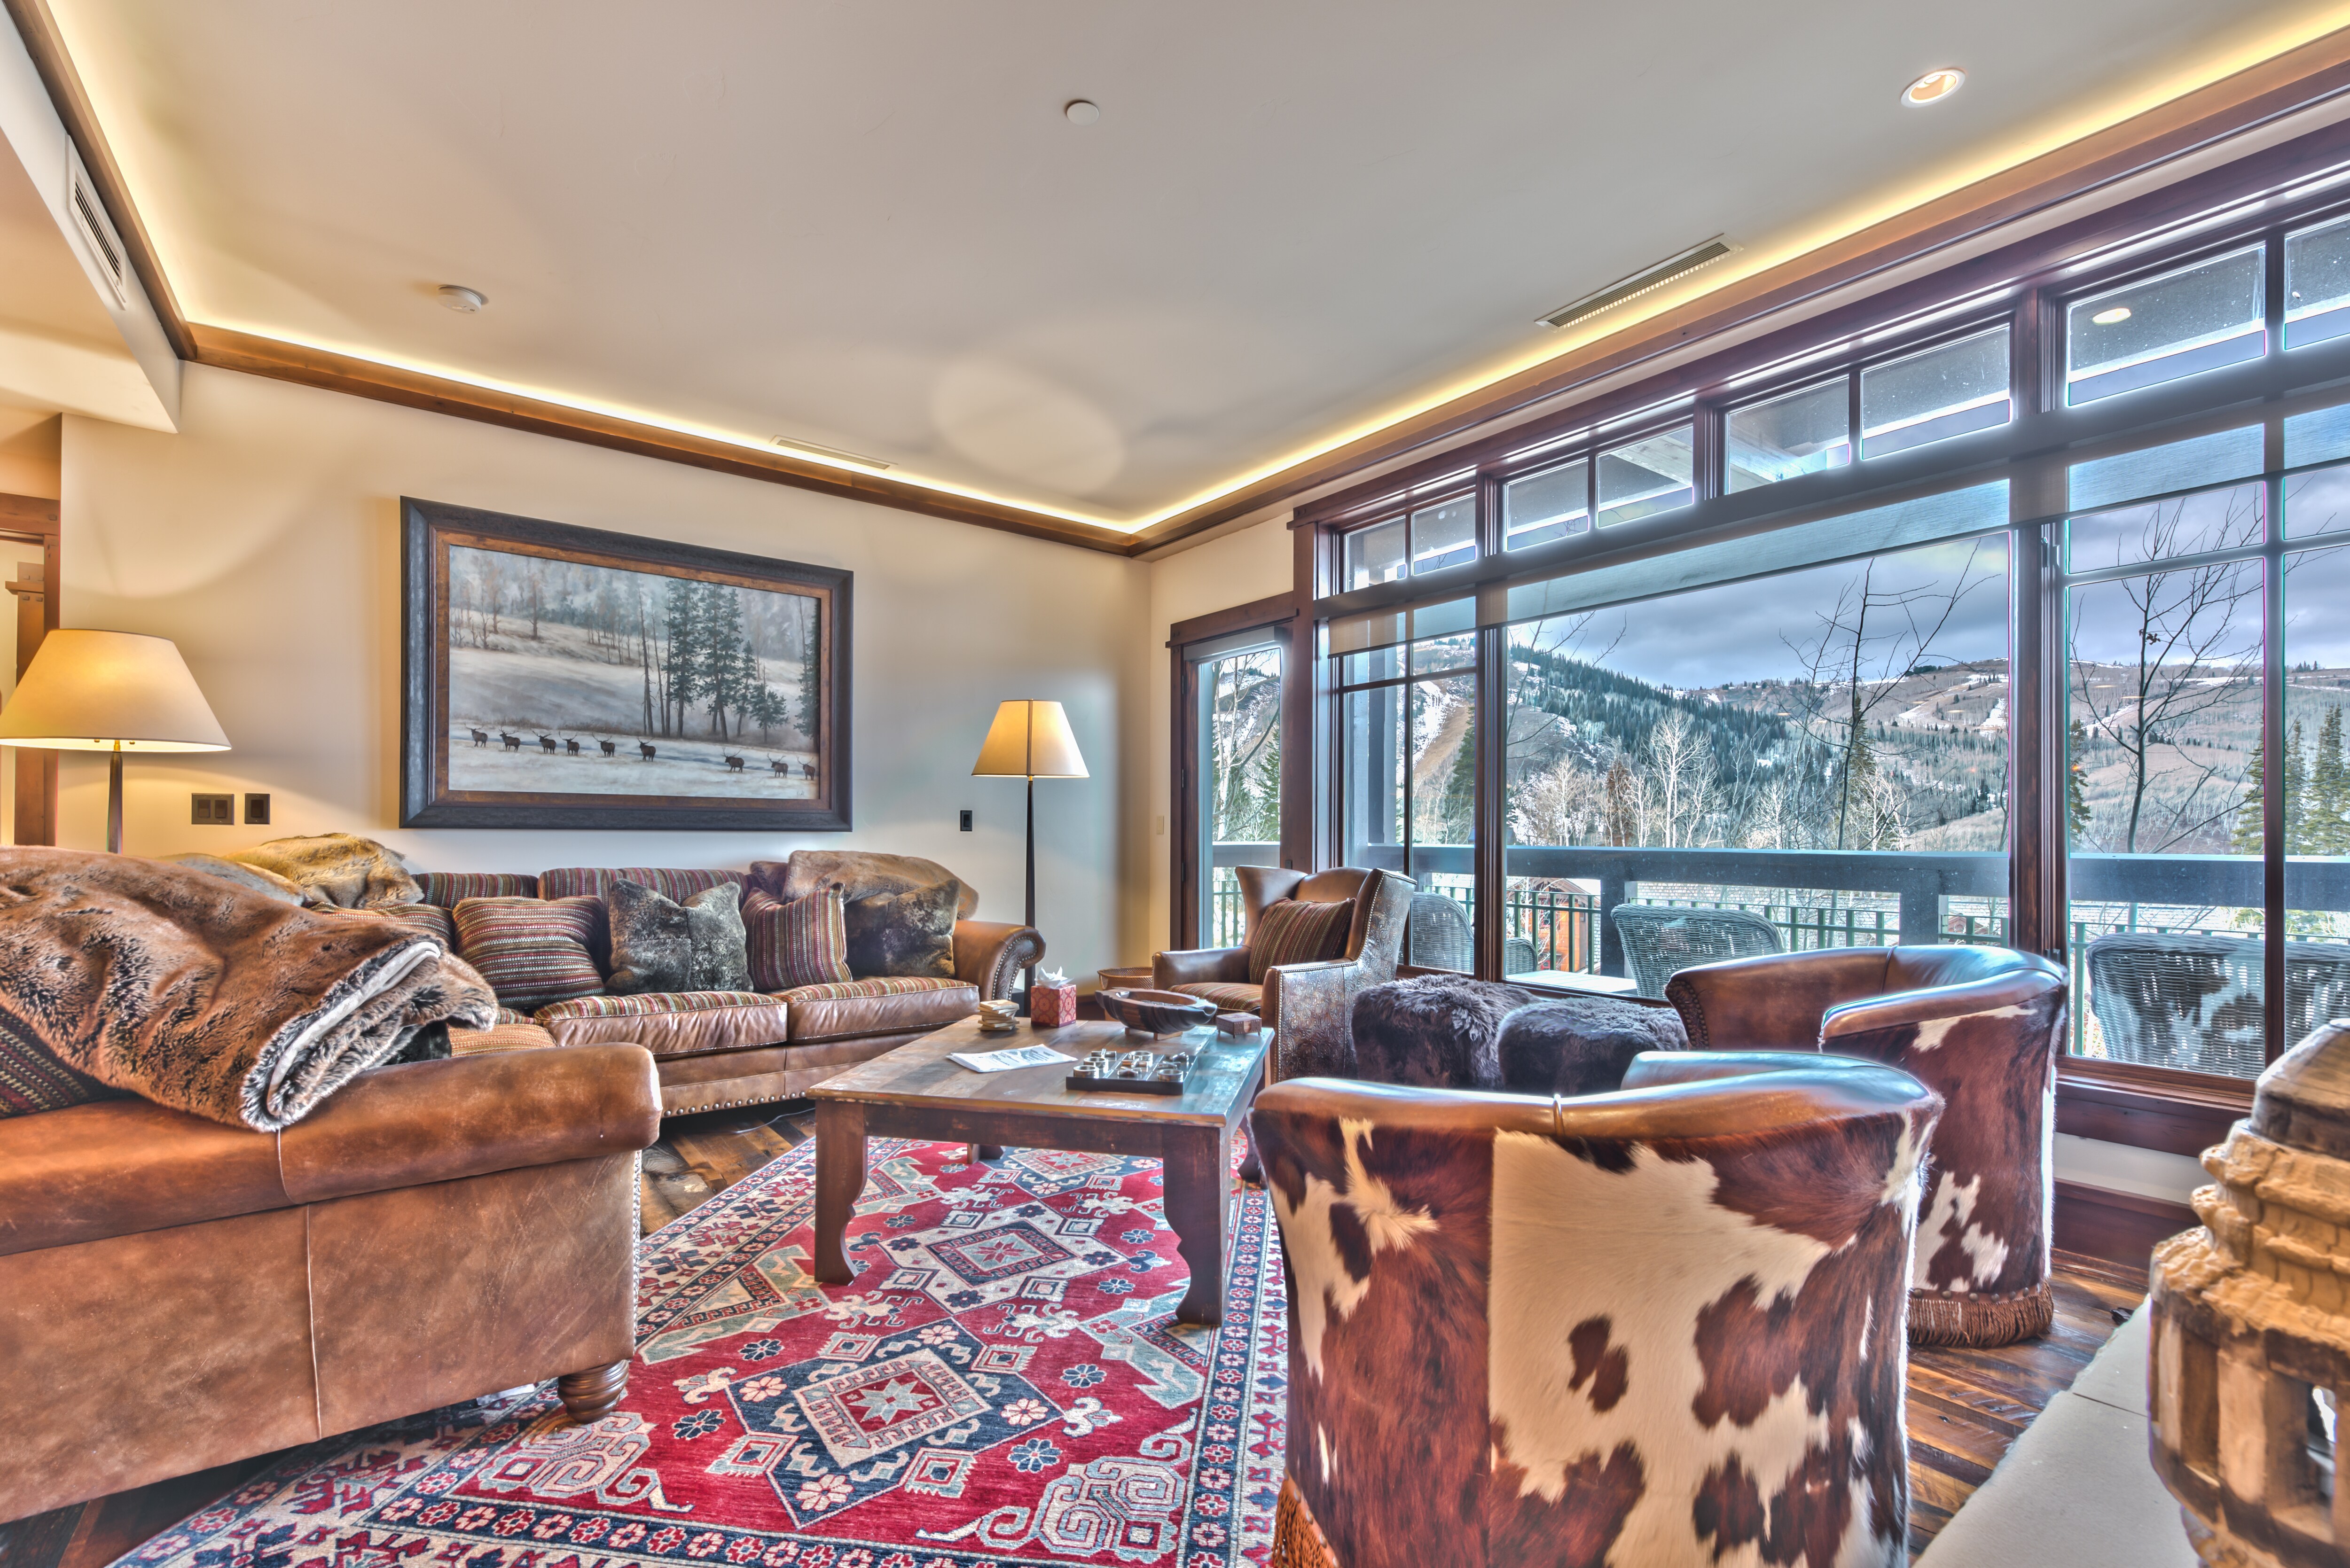 Spacious Living Room with Cozy Mountain Furnishings, a Warm Fireplace, Private Deck and Stunning Views!